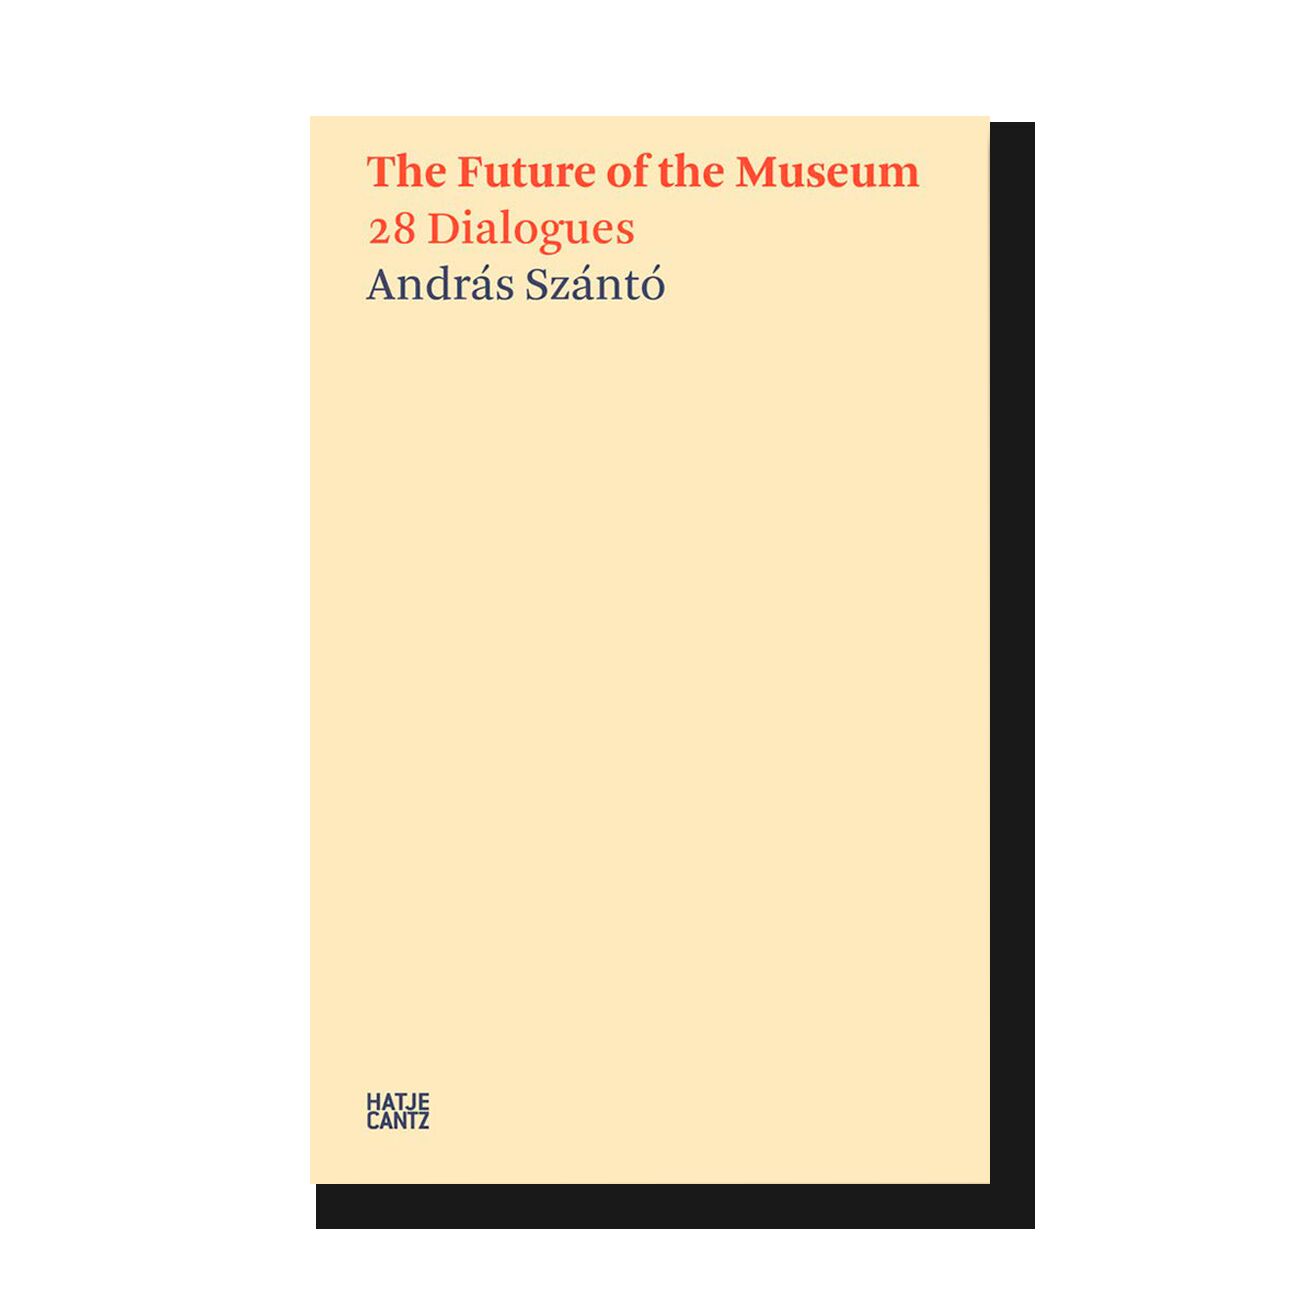 The Future of the Museum: 28 Dialogues